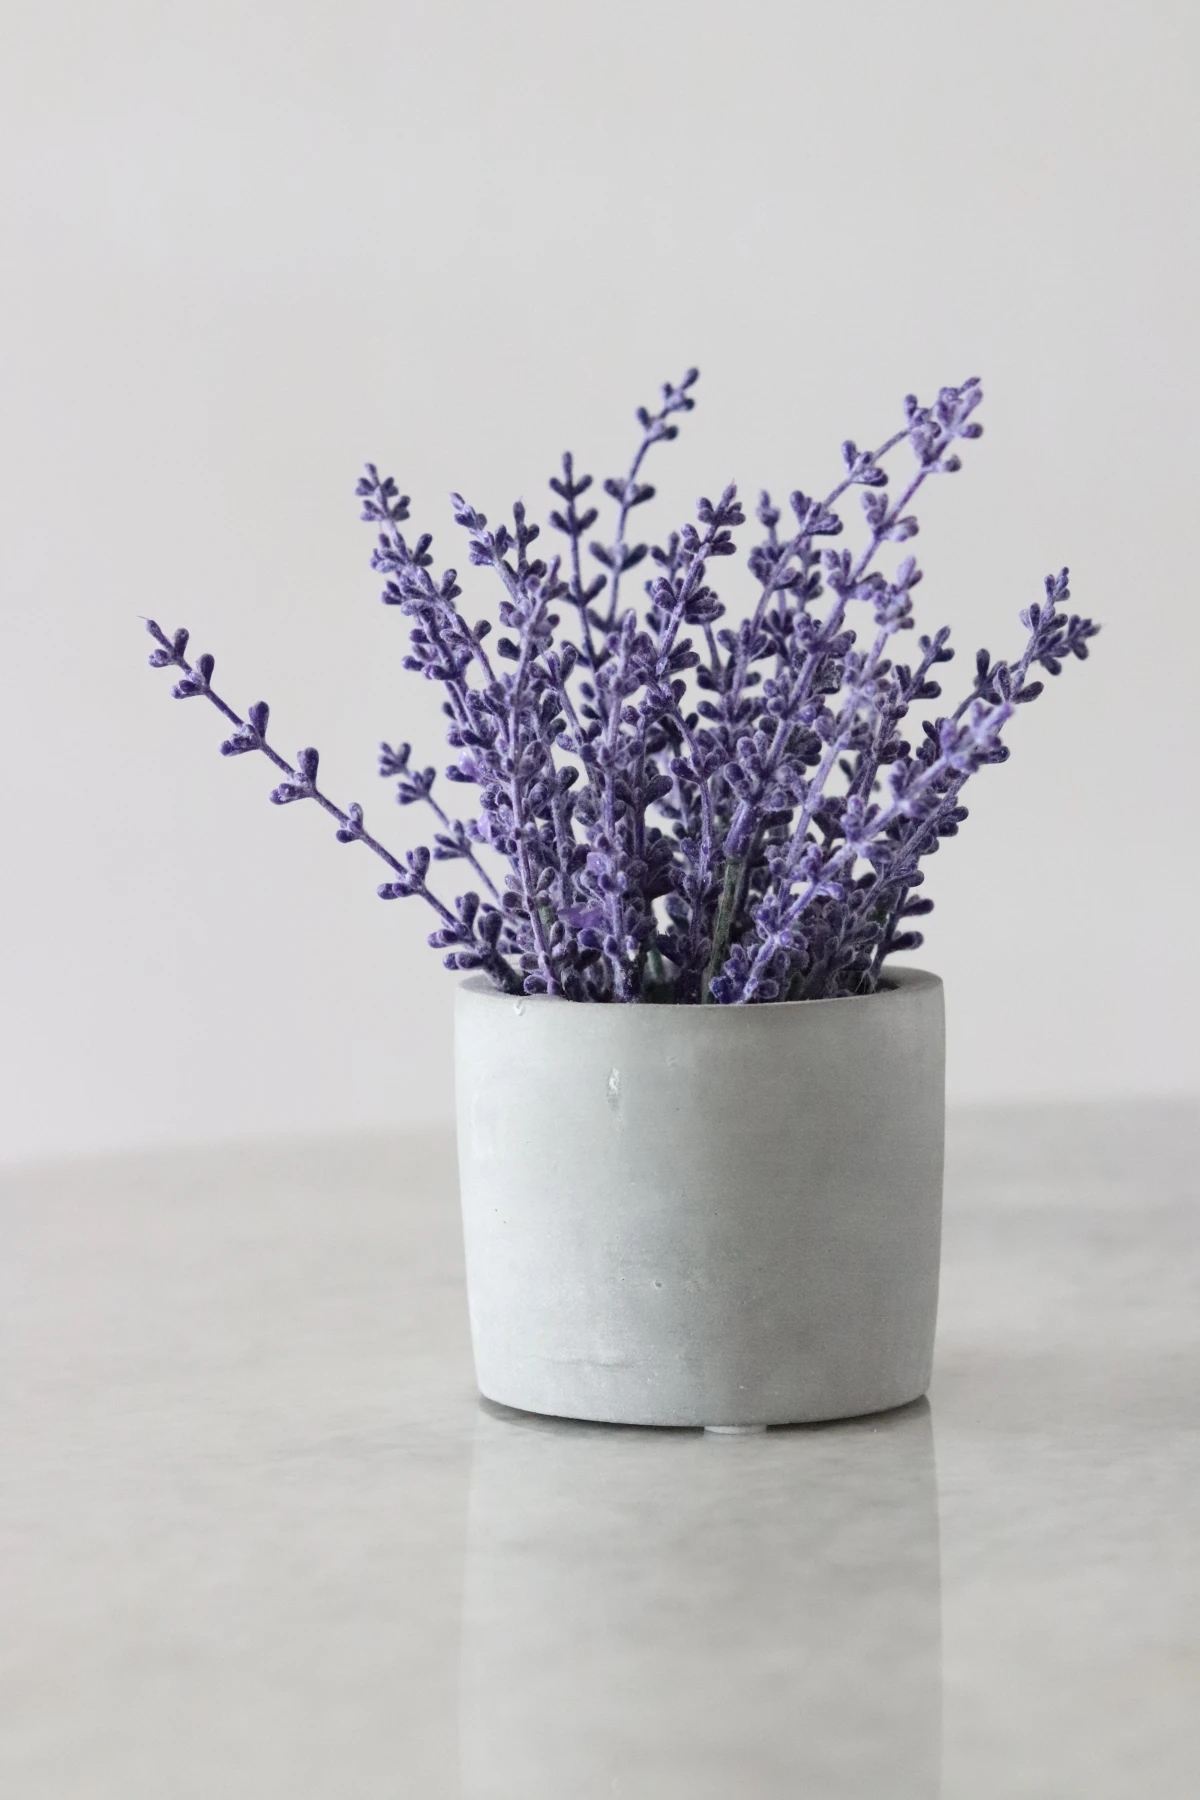 stress relieving plants lavender in a pot